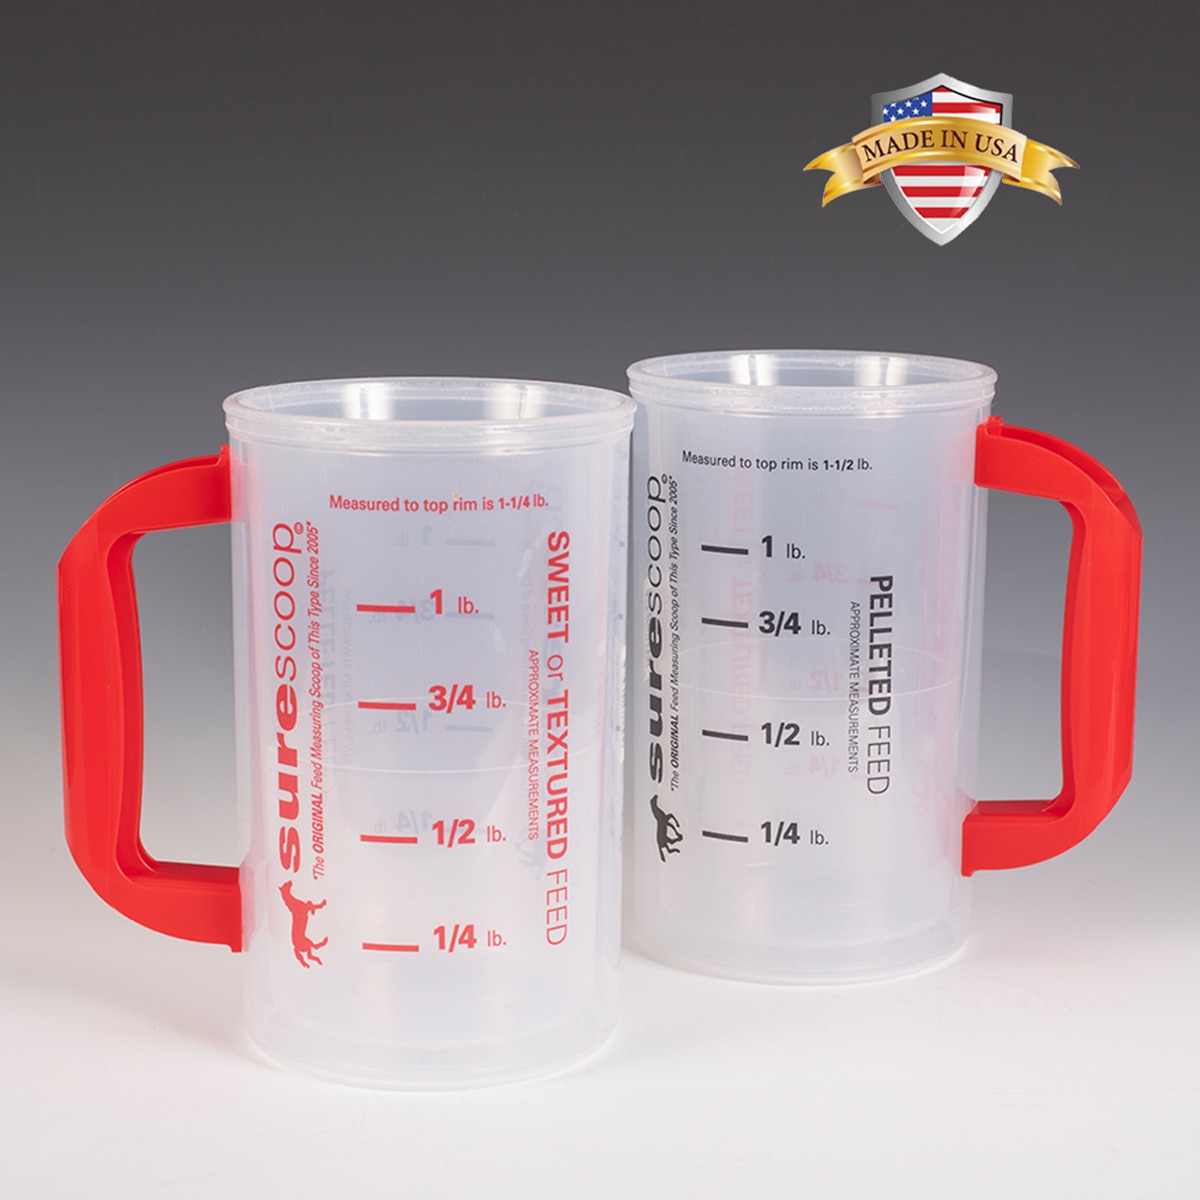 One quart measuring cup - Pack of 24